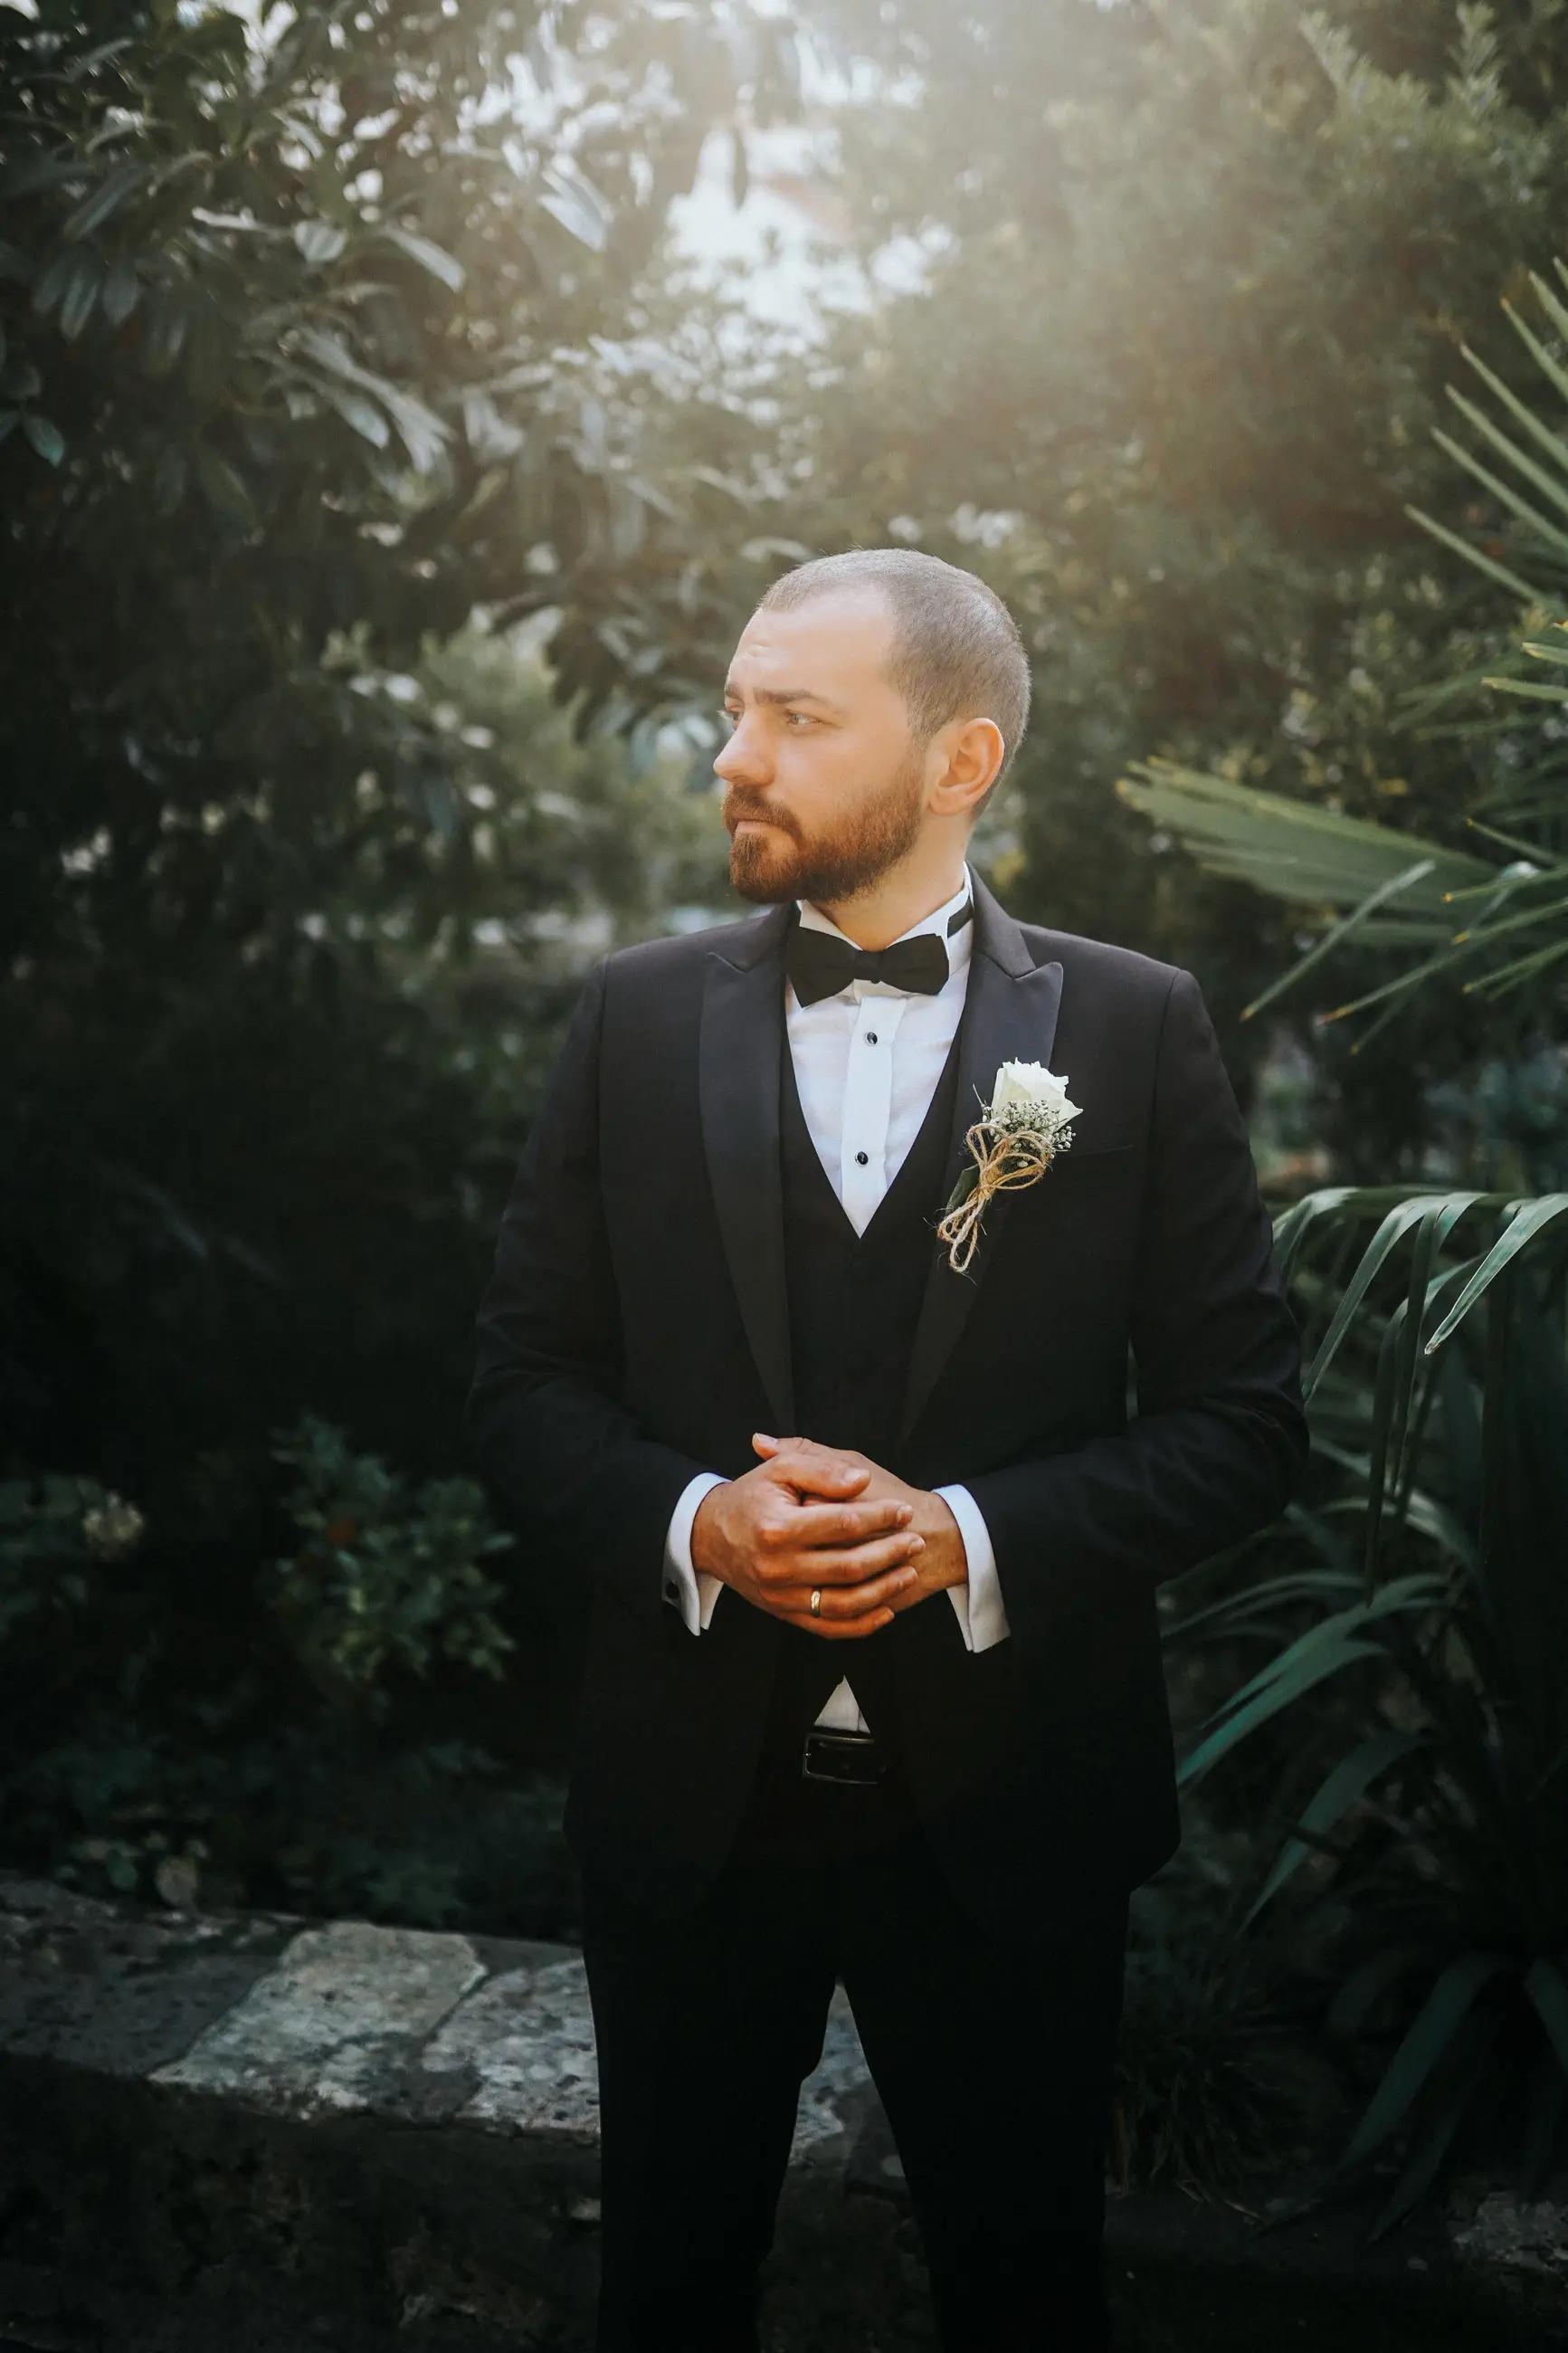 How to Pick the Best Tuxedo Colors Image